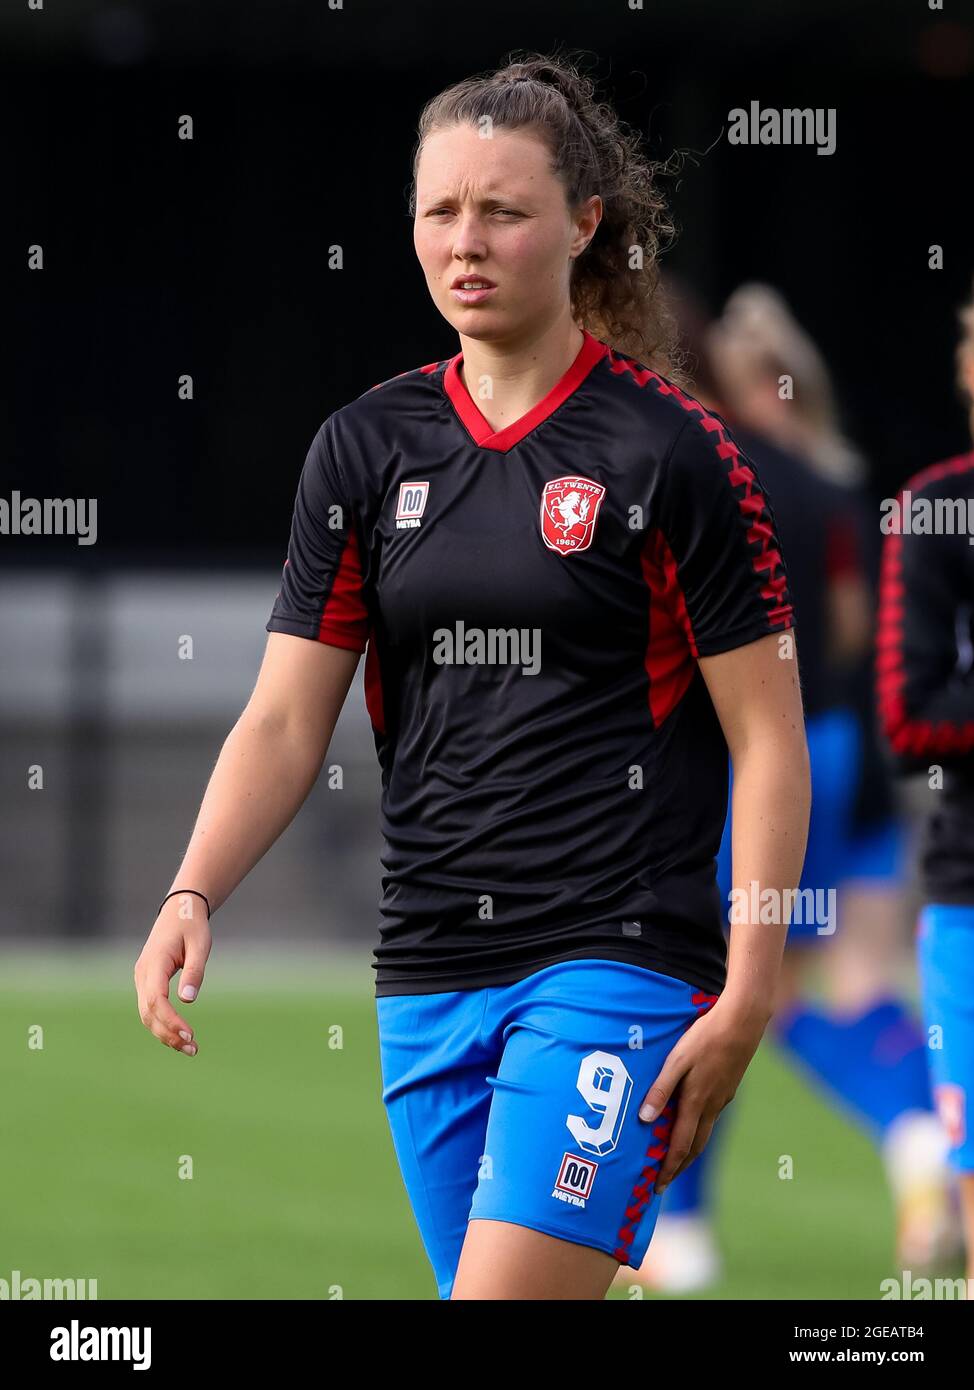 ENSCHEDE, NETHERLANDS - AUGUST 18: Fenna Kalma of FC Twente before the UEFA  Women's Champions League First Qualifying Round match between FC Twente and FC  Nike at Sportclub Enschede on August 18,